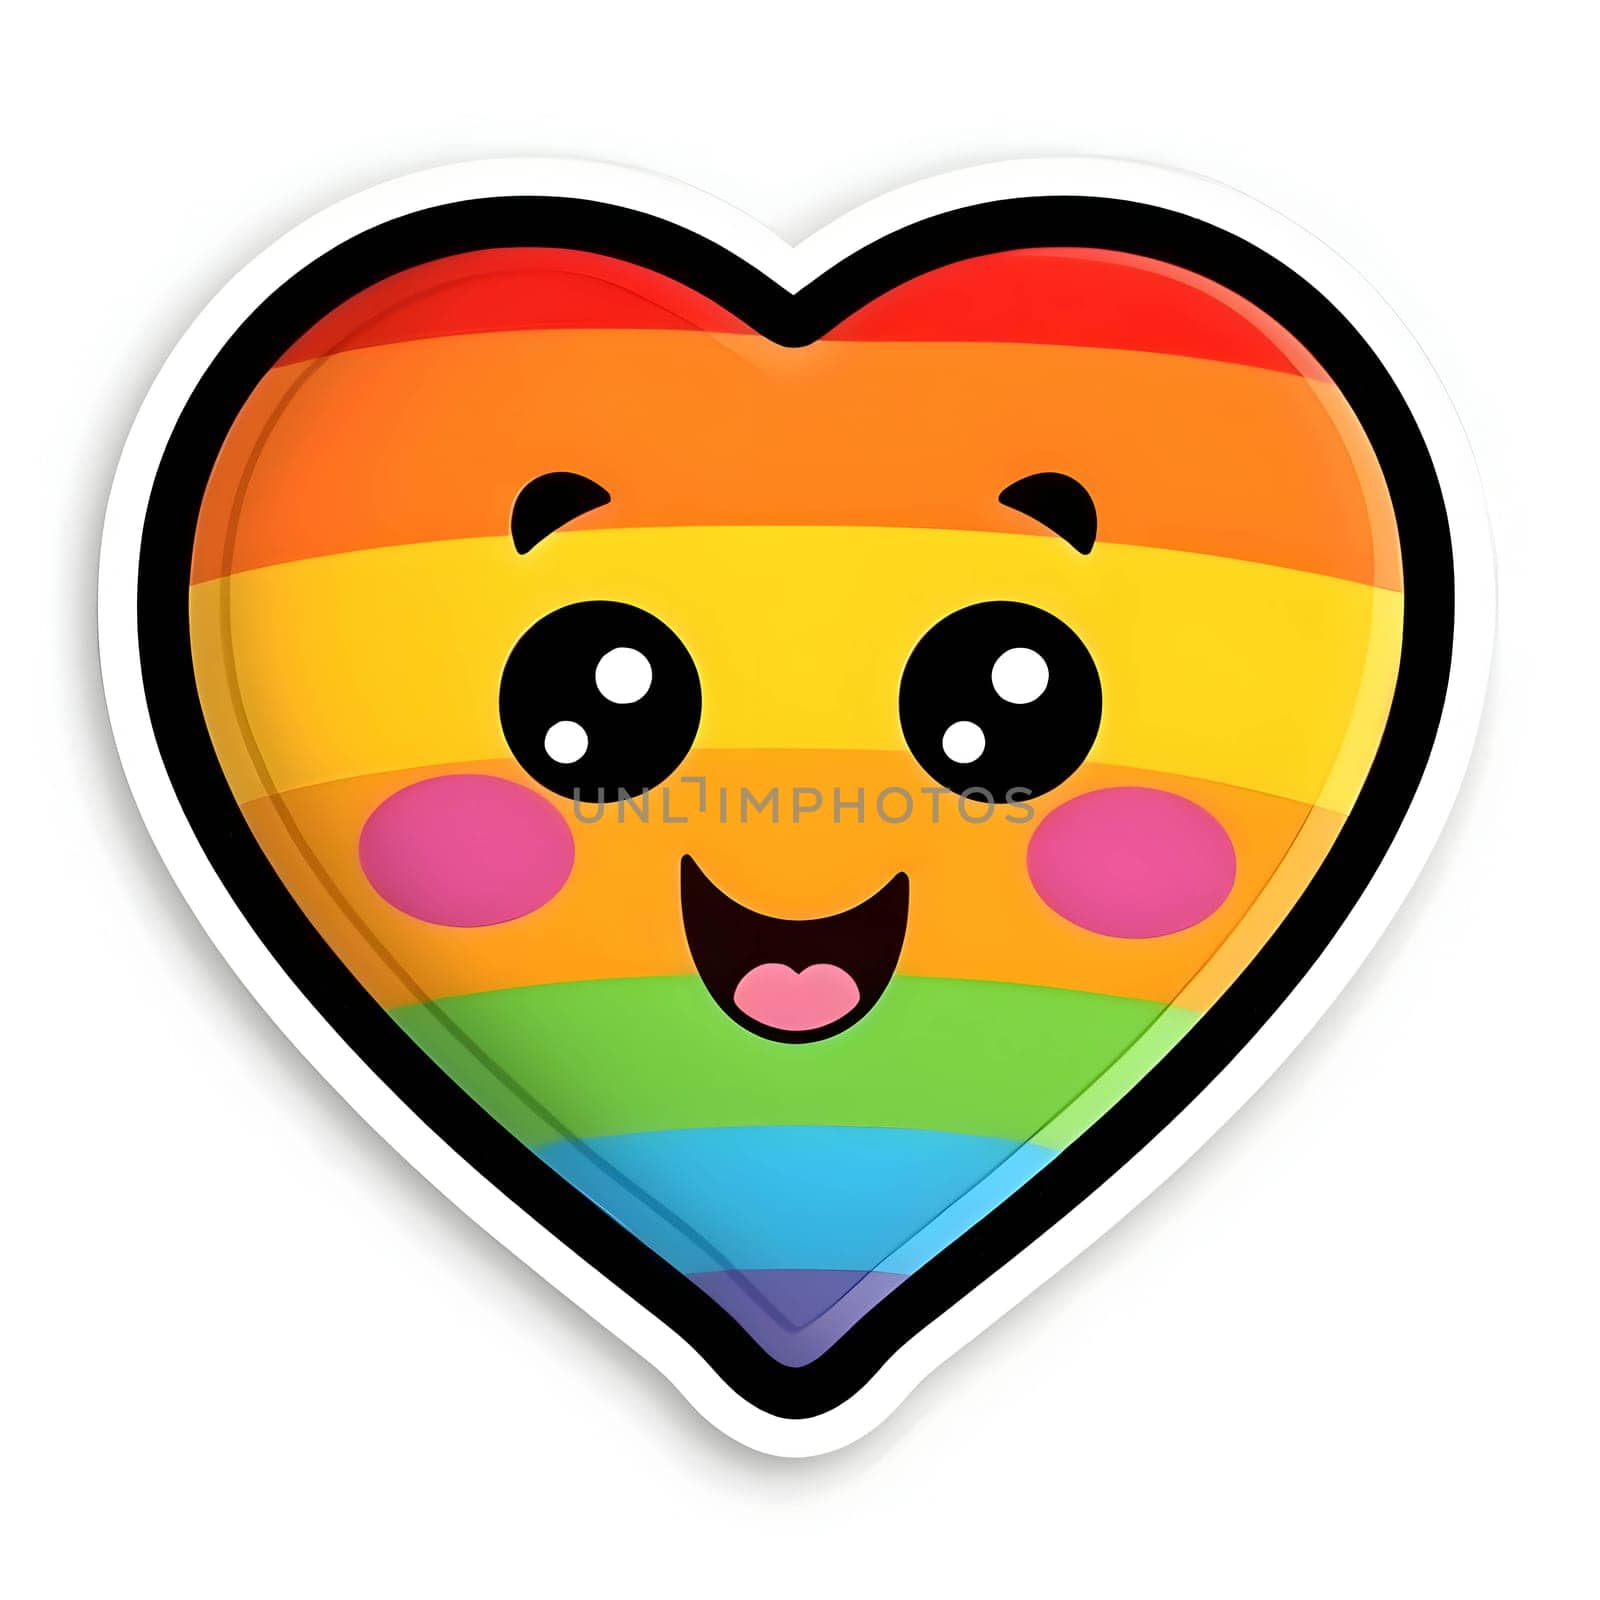 Rainbow heart sticker with a cheerful smile.